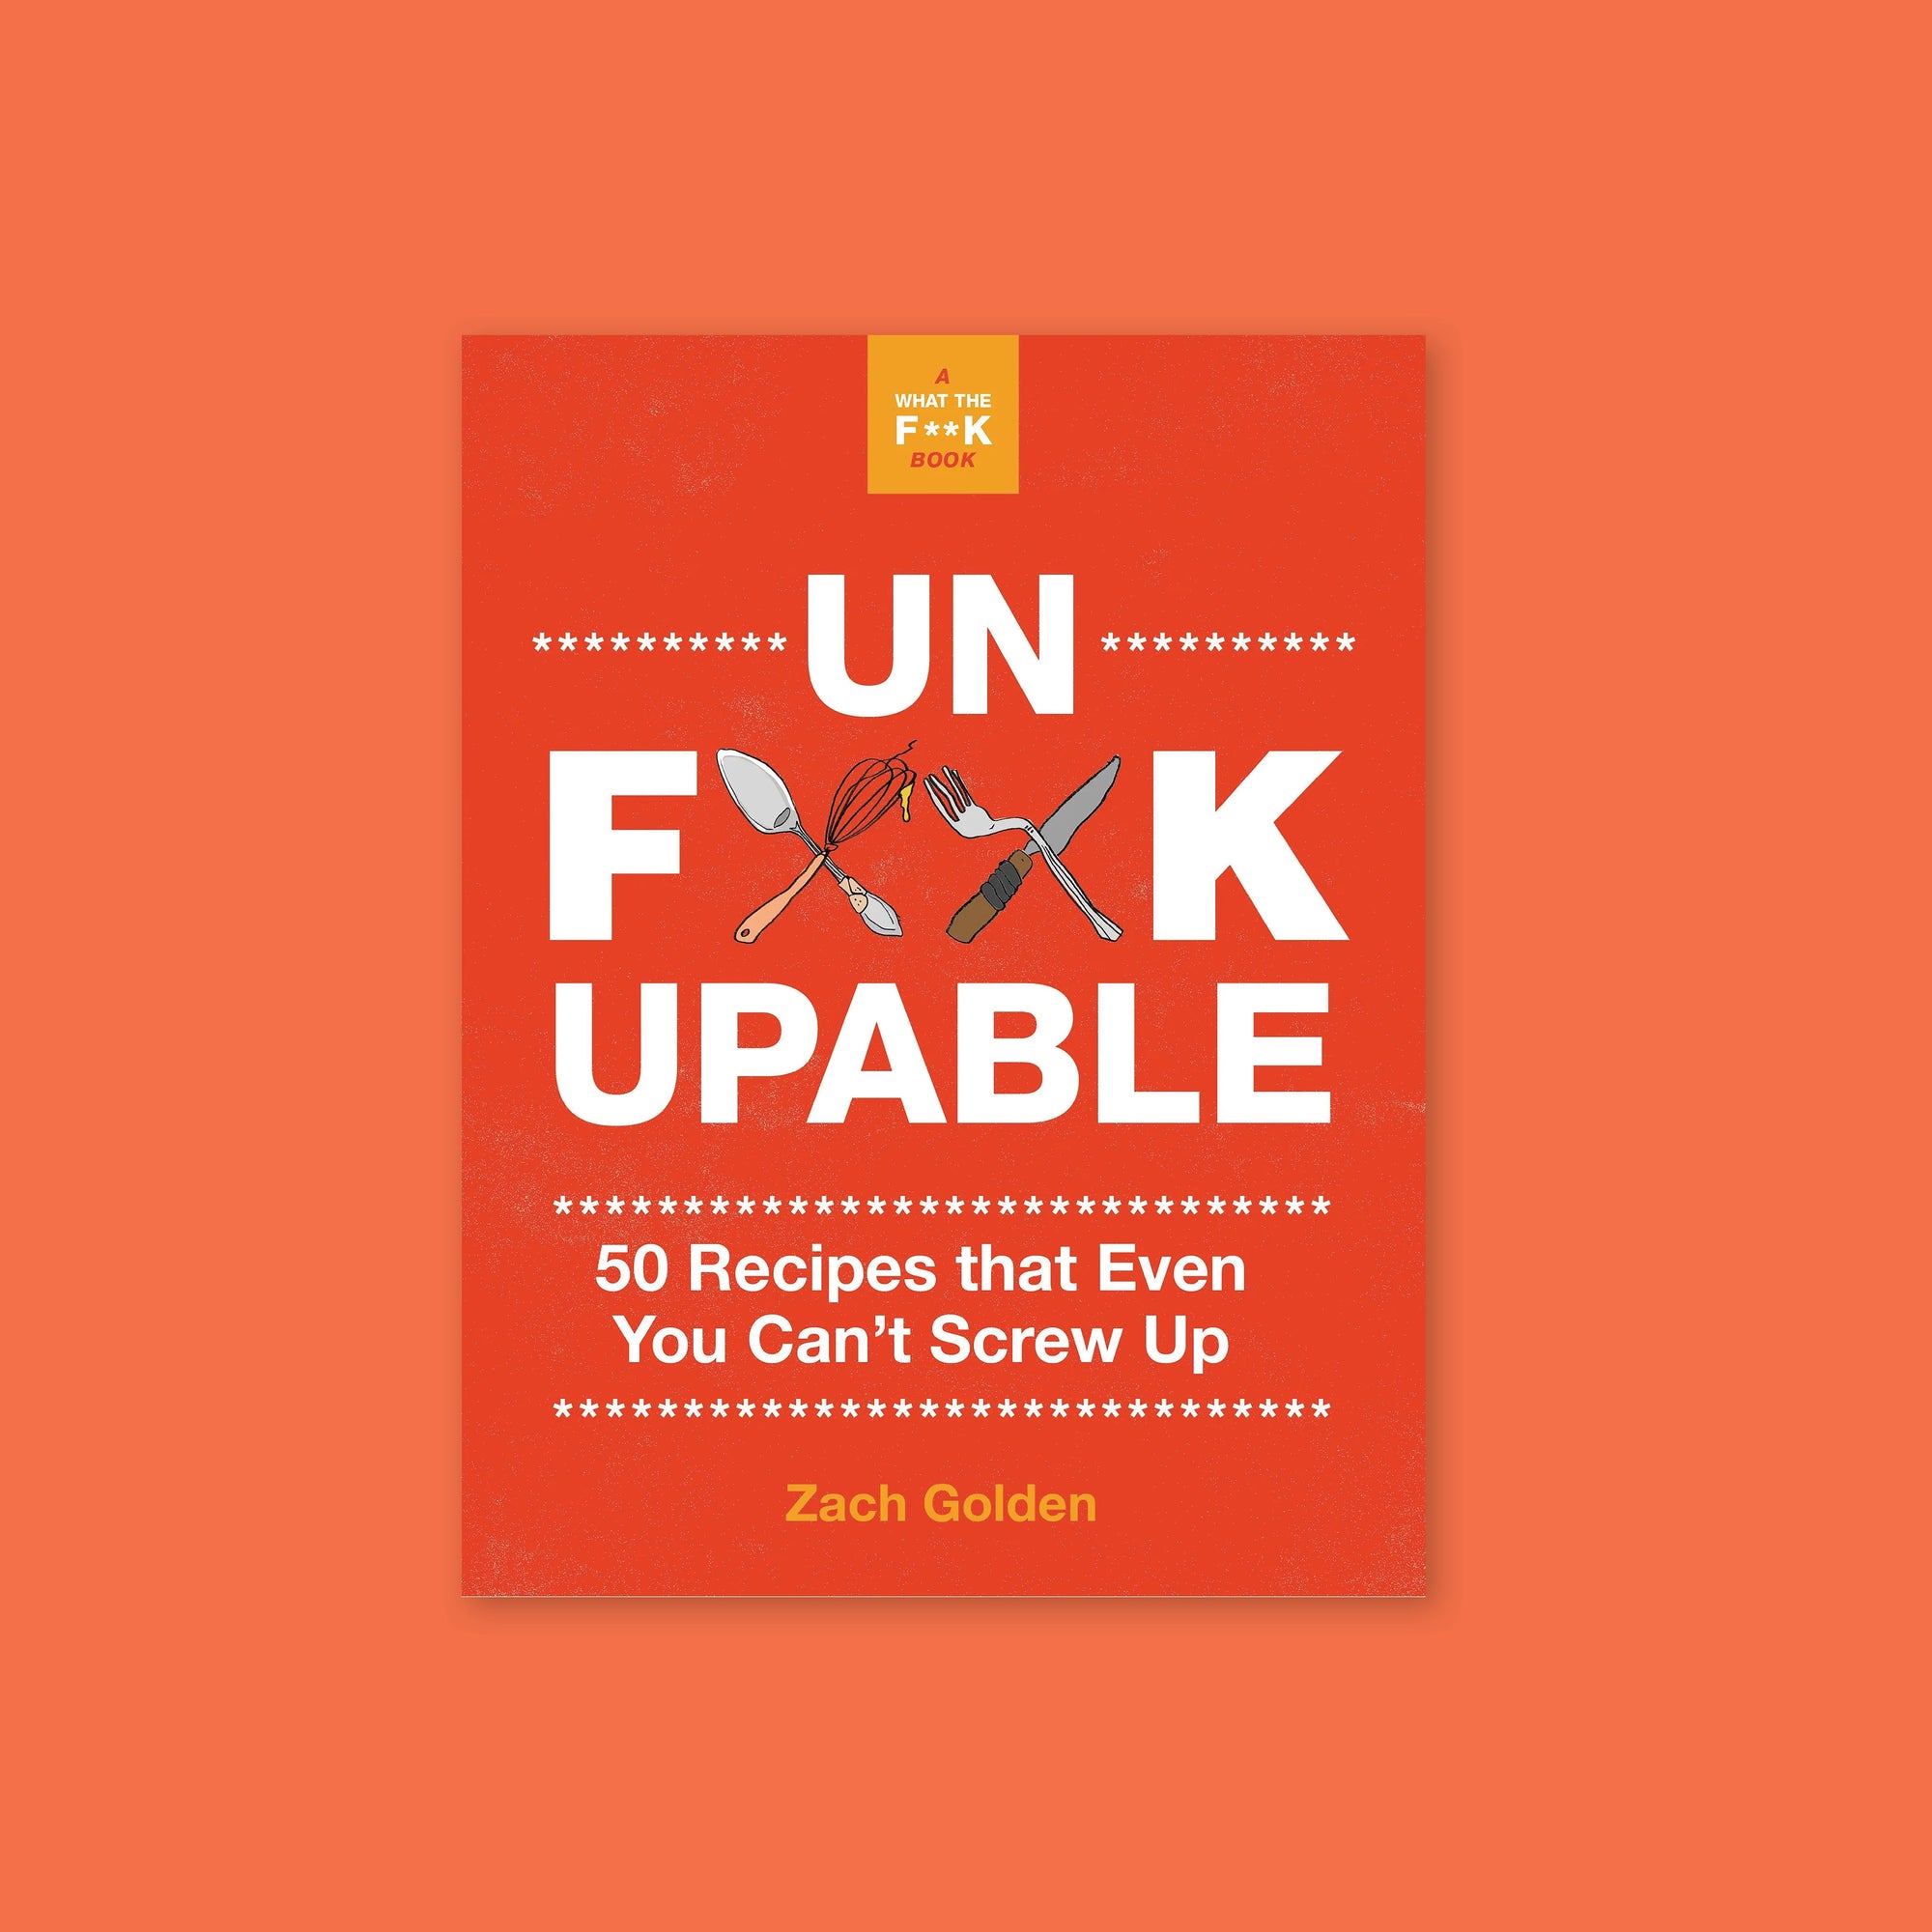 On an orangey-red background sits a red book. It is called "A WHAT THE F**K BOOK." It has illustraions of utensils crossed and in white it says "UN F**KUPABLE" in all caps, block font. It also says "50 Recipes that Even You Can't Screw Up" in white, block font. By Zach Golden.